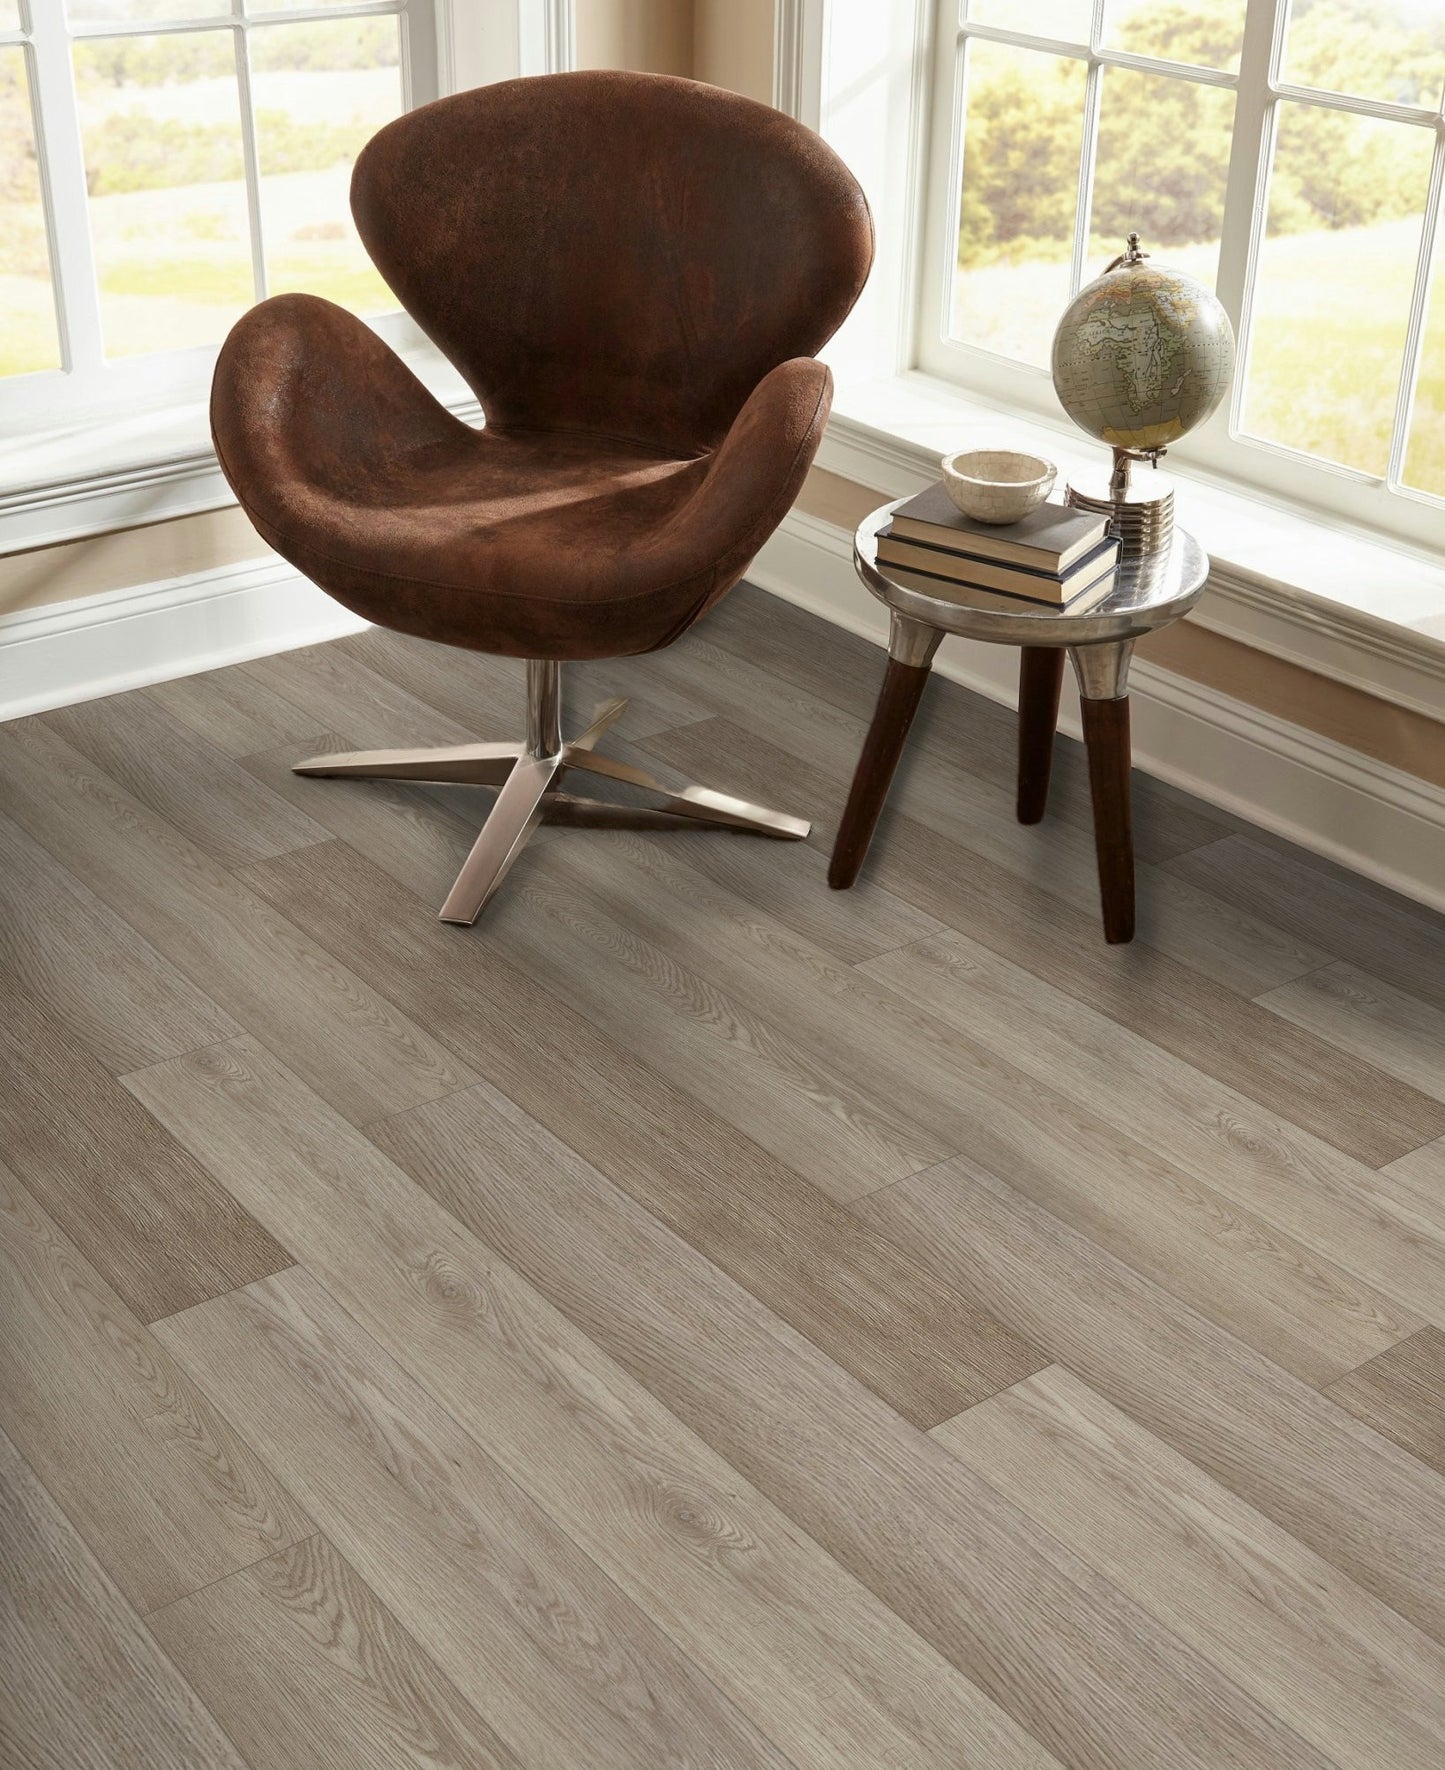 5mm Thick Rigid Core Vinyl Plank Flooring 5.91 in. Width x 48 in. Length (27.56 sq. ft. per box) - Smoked Timber